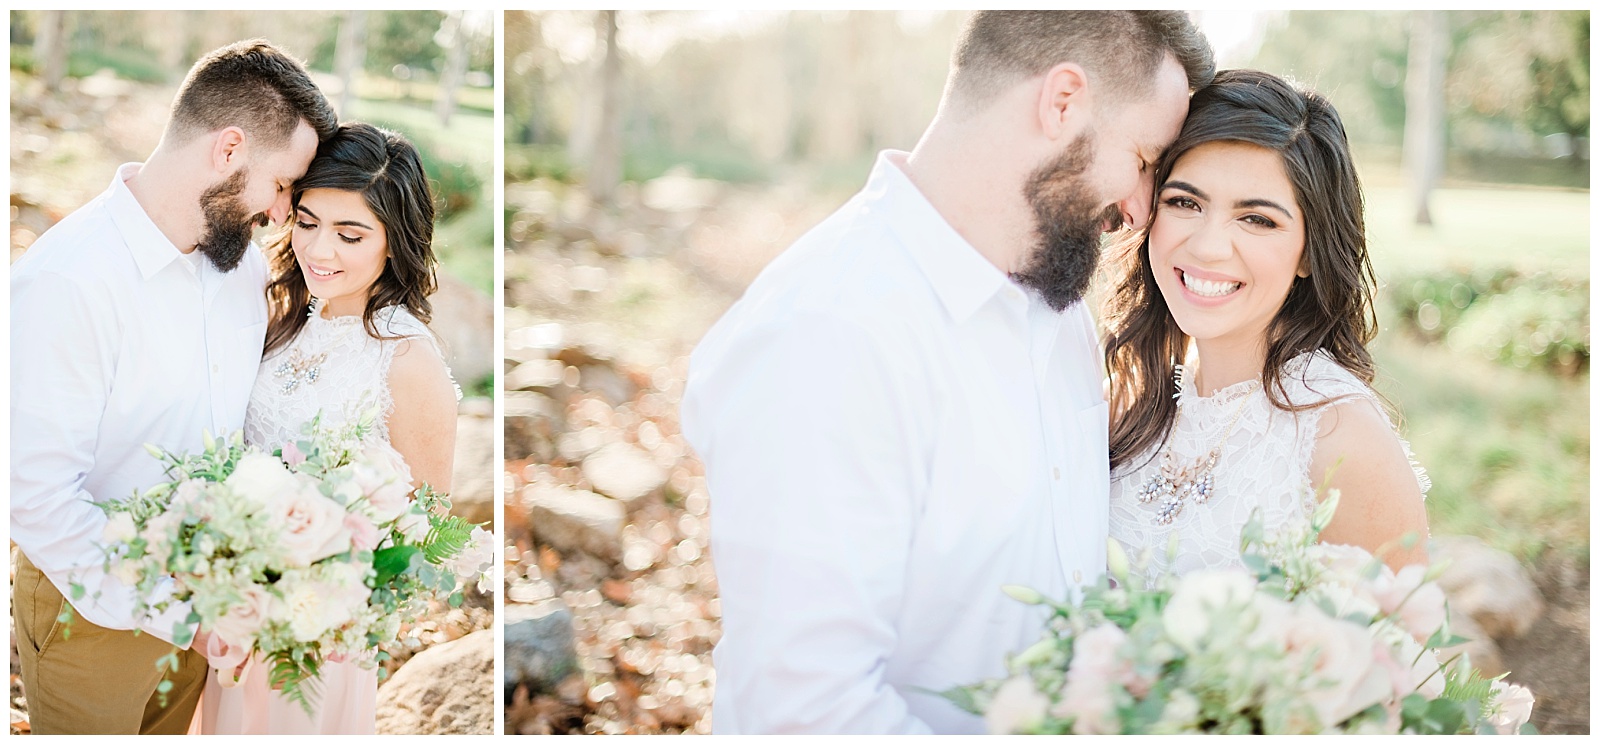 Styled Orange County Engagement Session by Mollie Jane Photography. To see more go to www.molliejanephotography.com